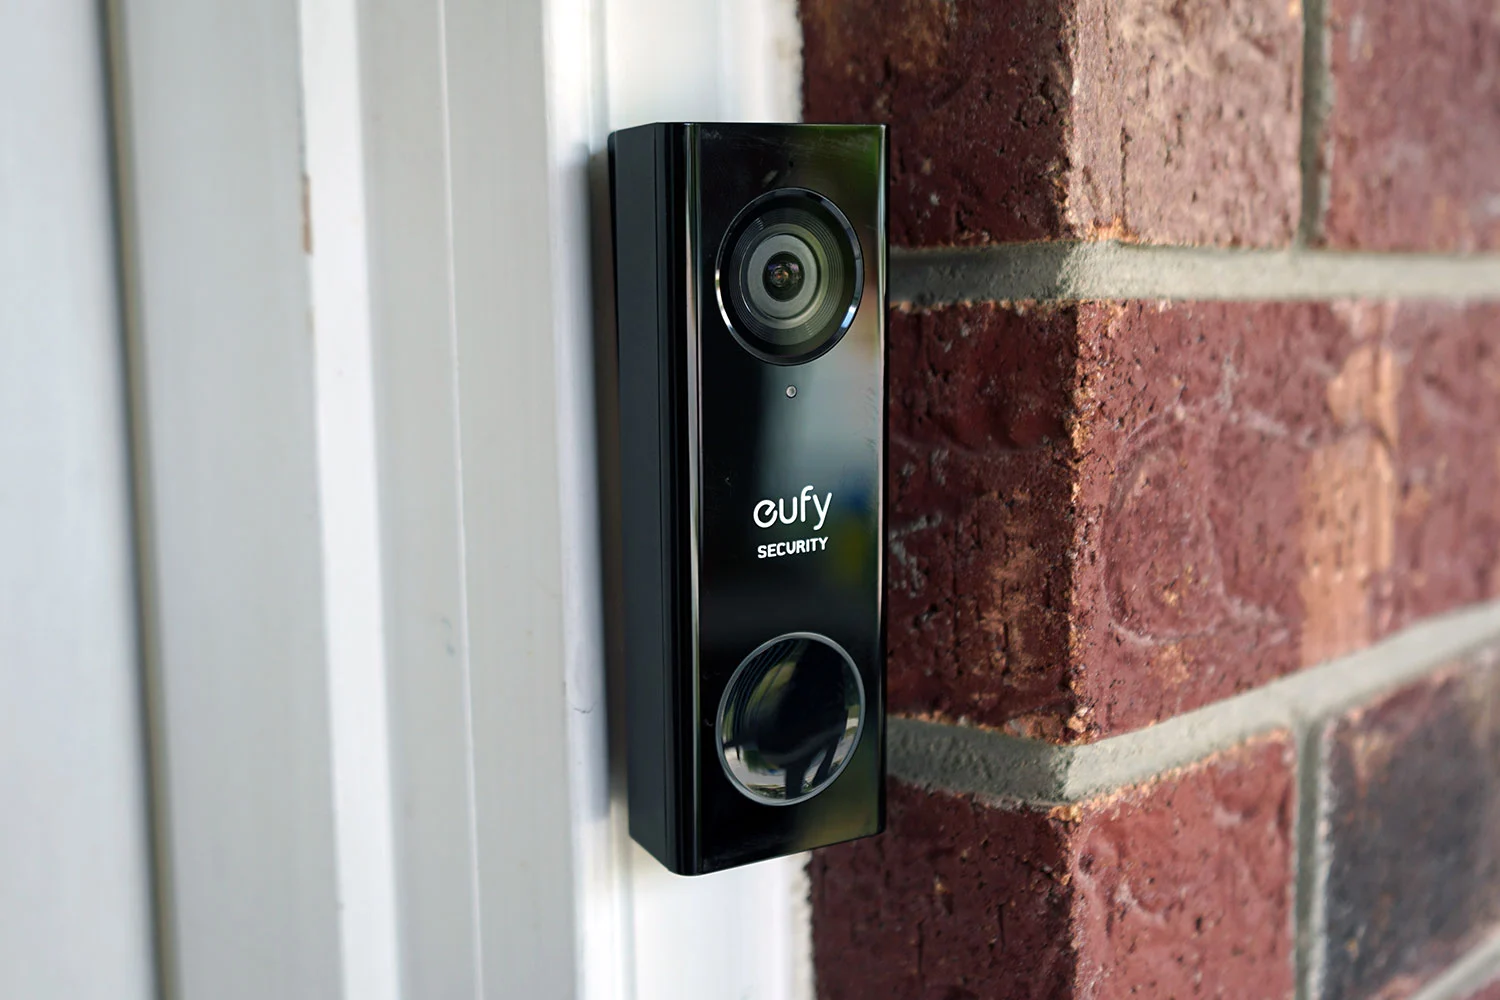 Does Eufy Video Doorbell Camera Work Without WiFi or Internet